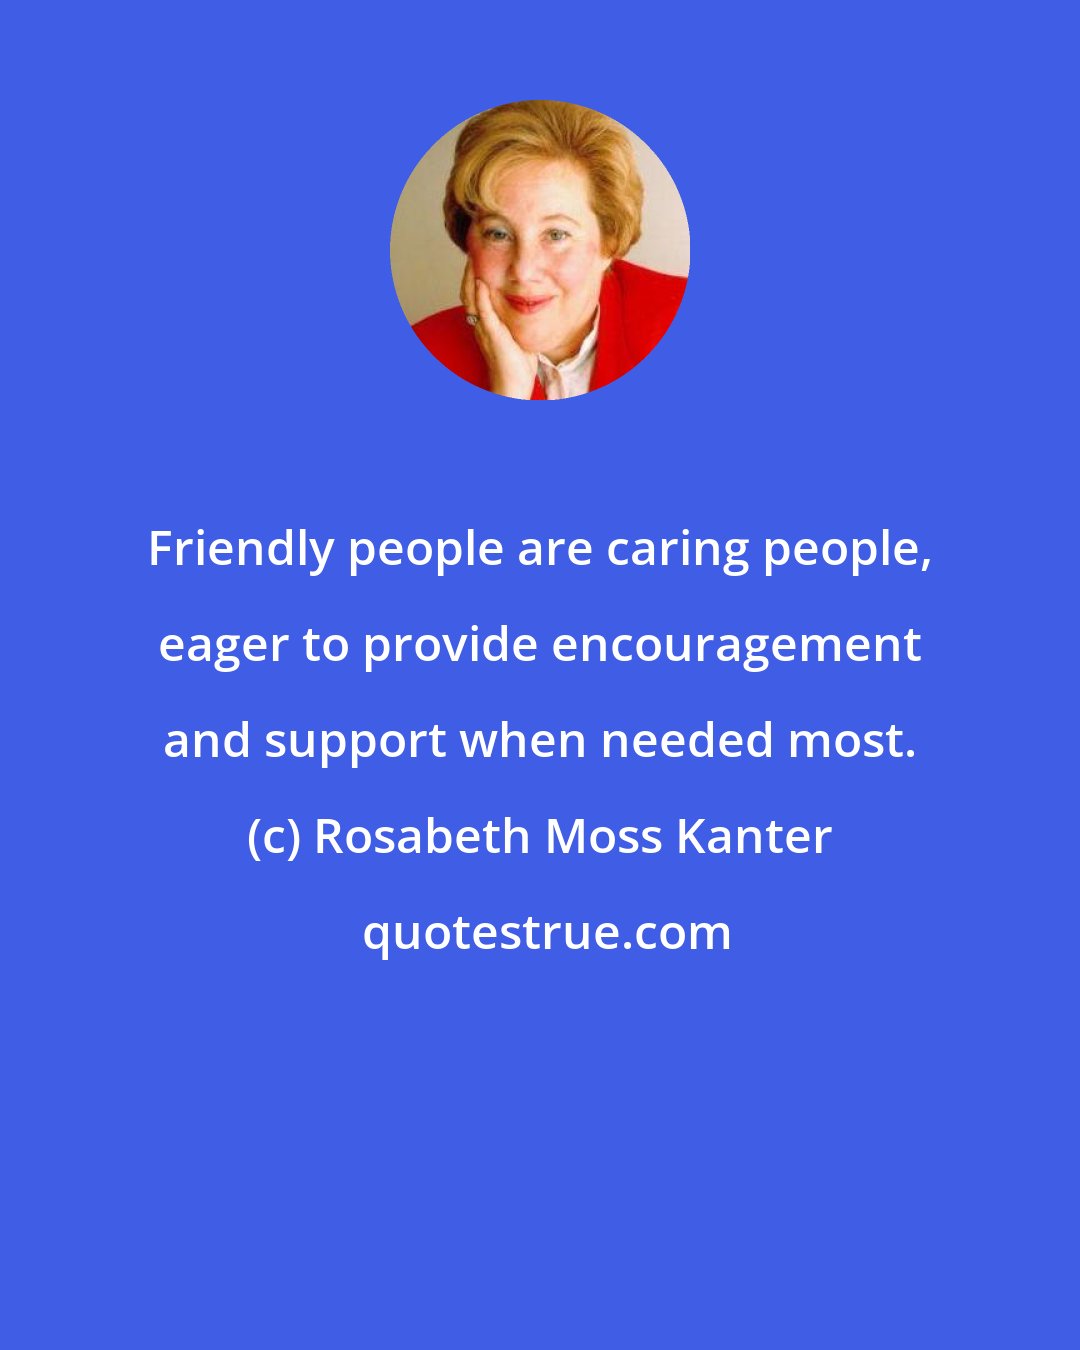 Rosabeth Moss Kanter: Friendly people are caring people, eager to provide encouragement and support when needed most.